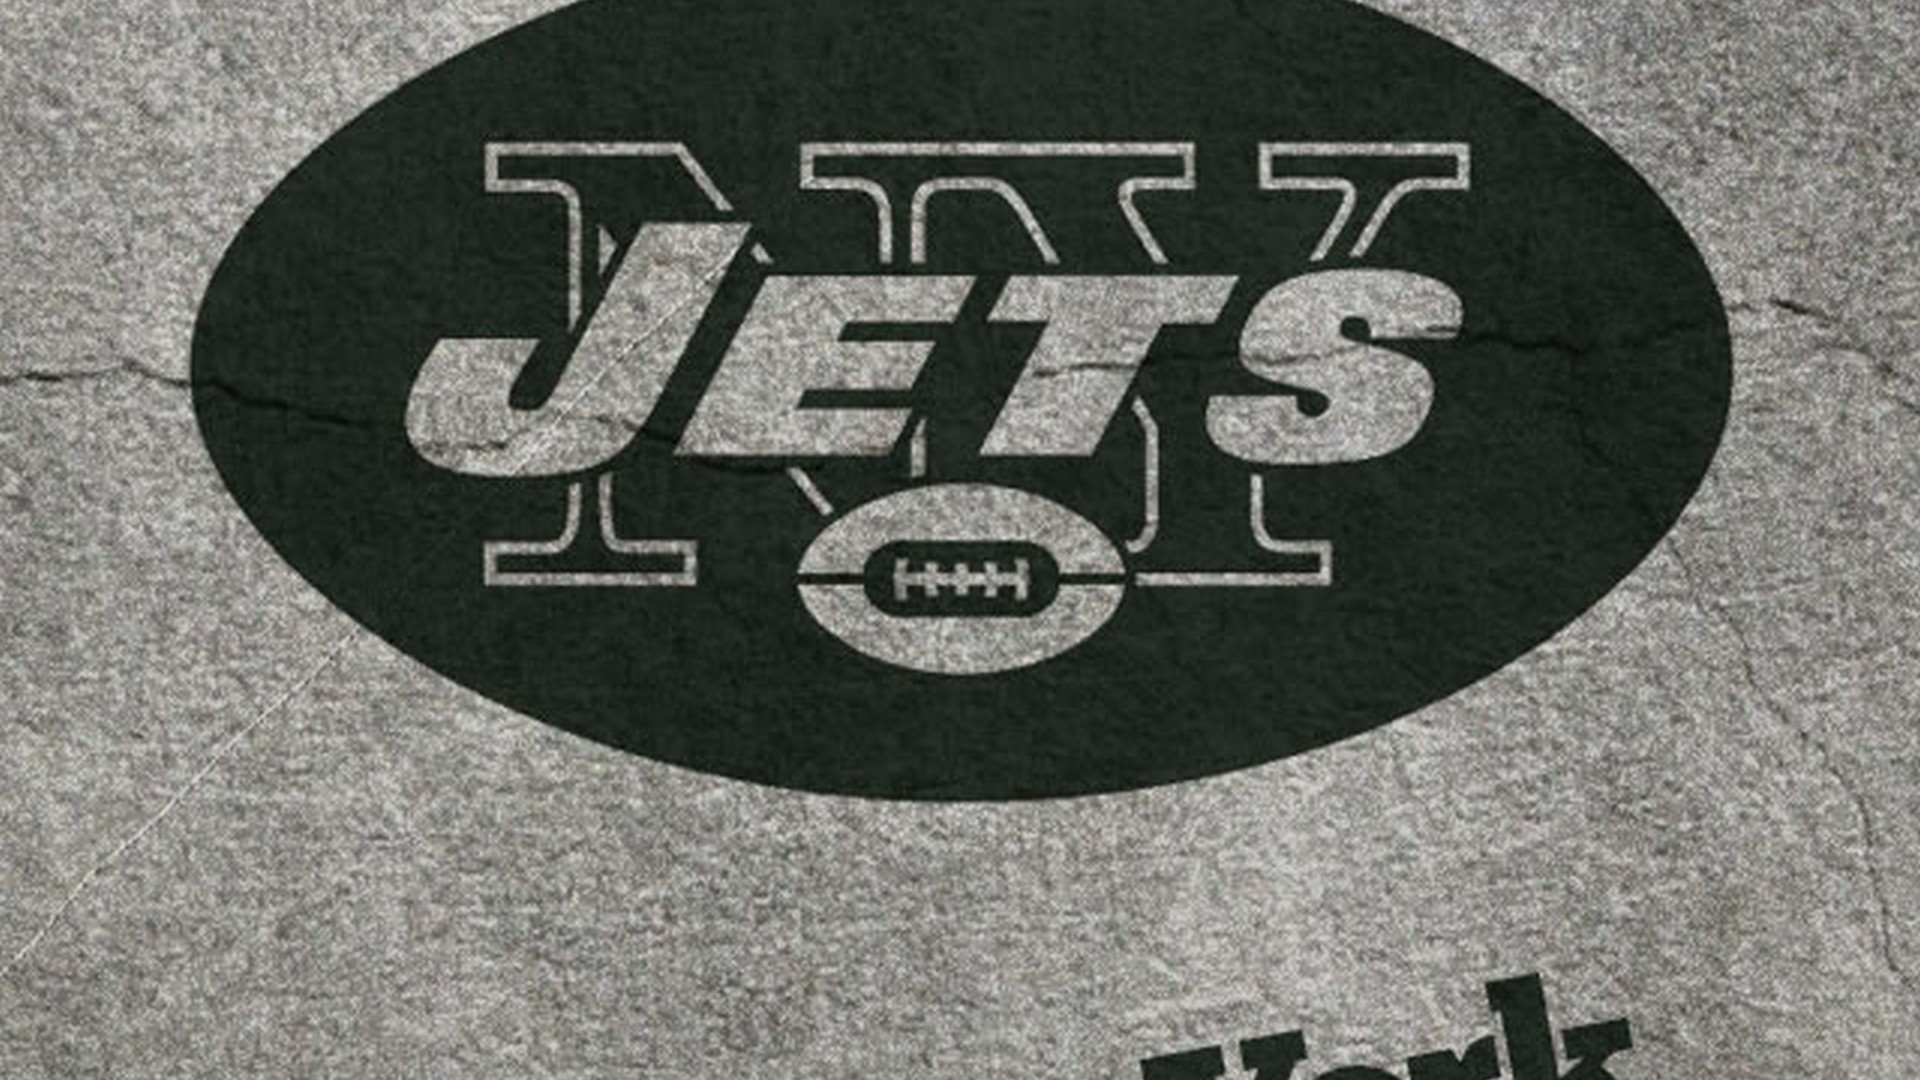 New York Jets Wallpaper For Mac Backgrounds with resolution 1920x1080 pixel. You can make this wallpaper for your Mac or Windows Desktop Background, iPhone, Android or Tablet and another Smartphone device